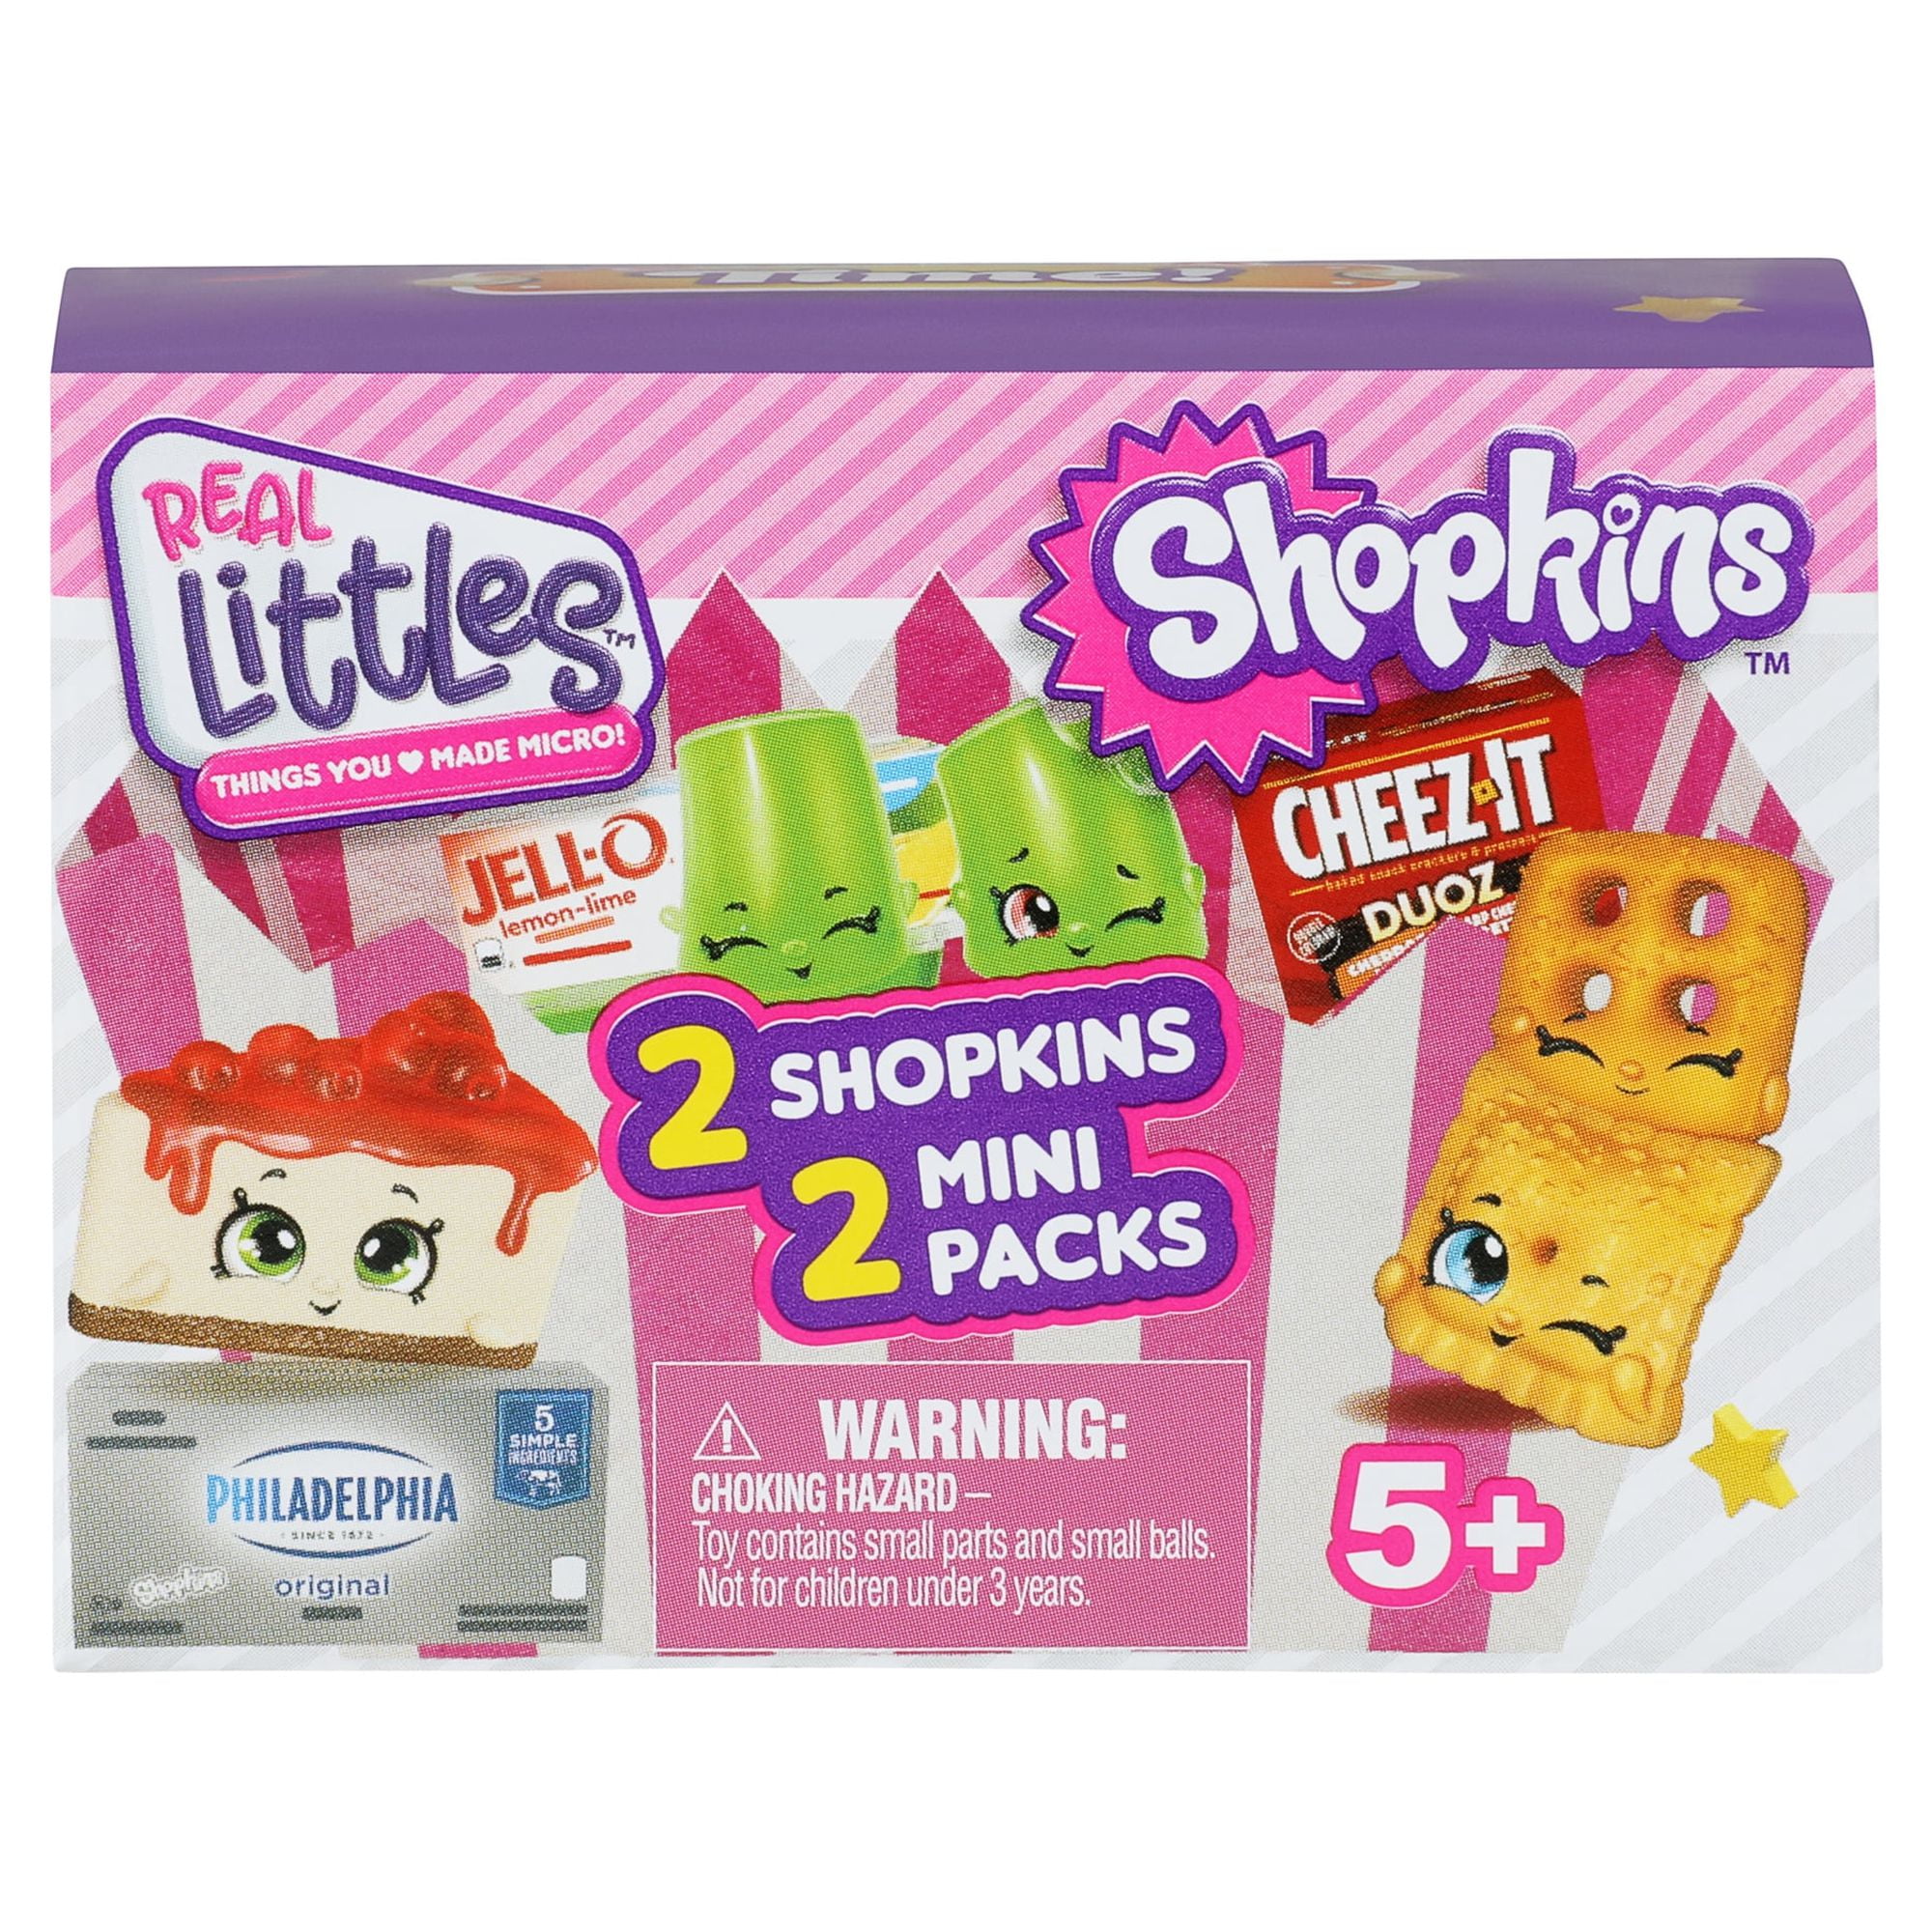 Shopkins Mini Pack Real Littles Snack Ball Micro Mart Mystery Mini Toys 2  Pack Bundle with 2 My Outlet Mall Stickers